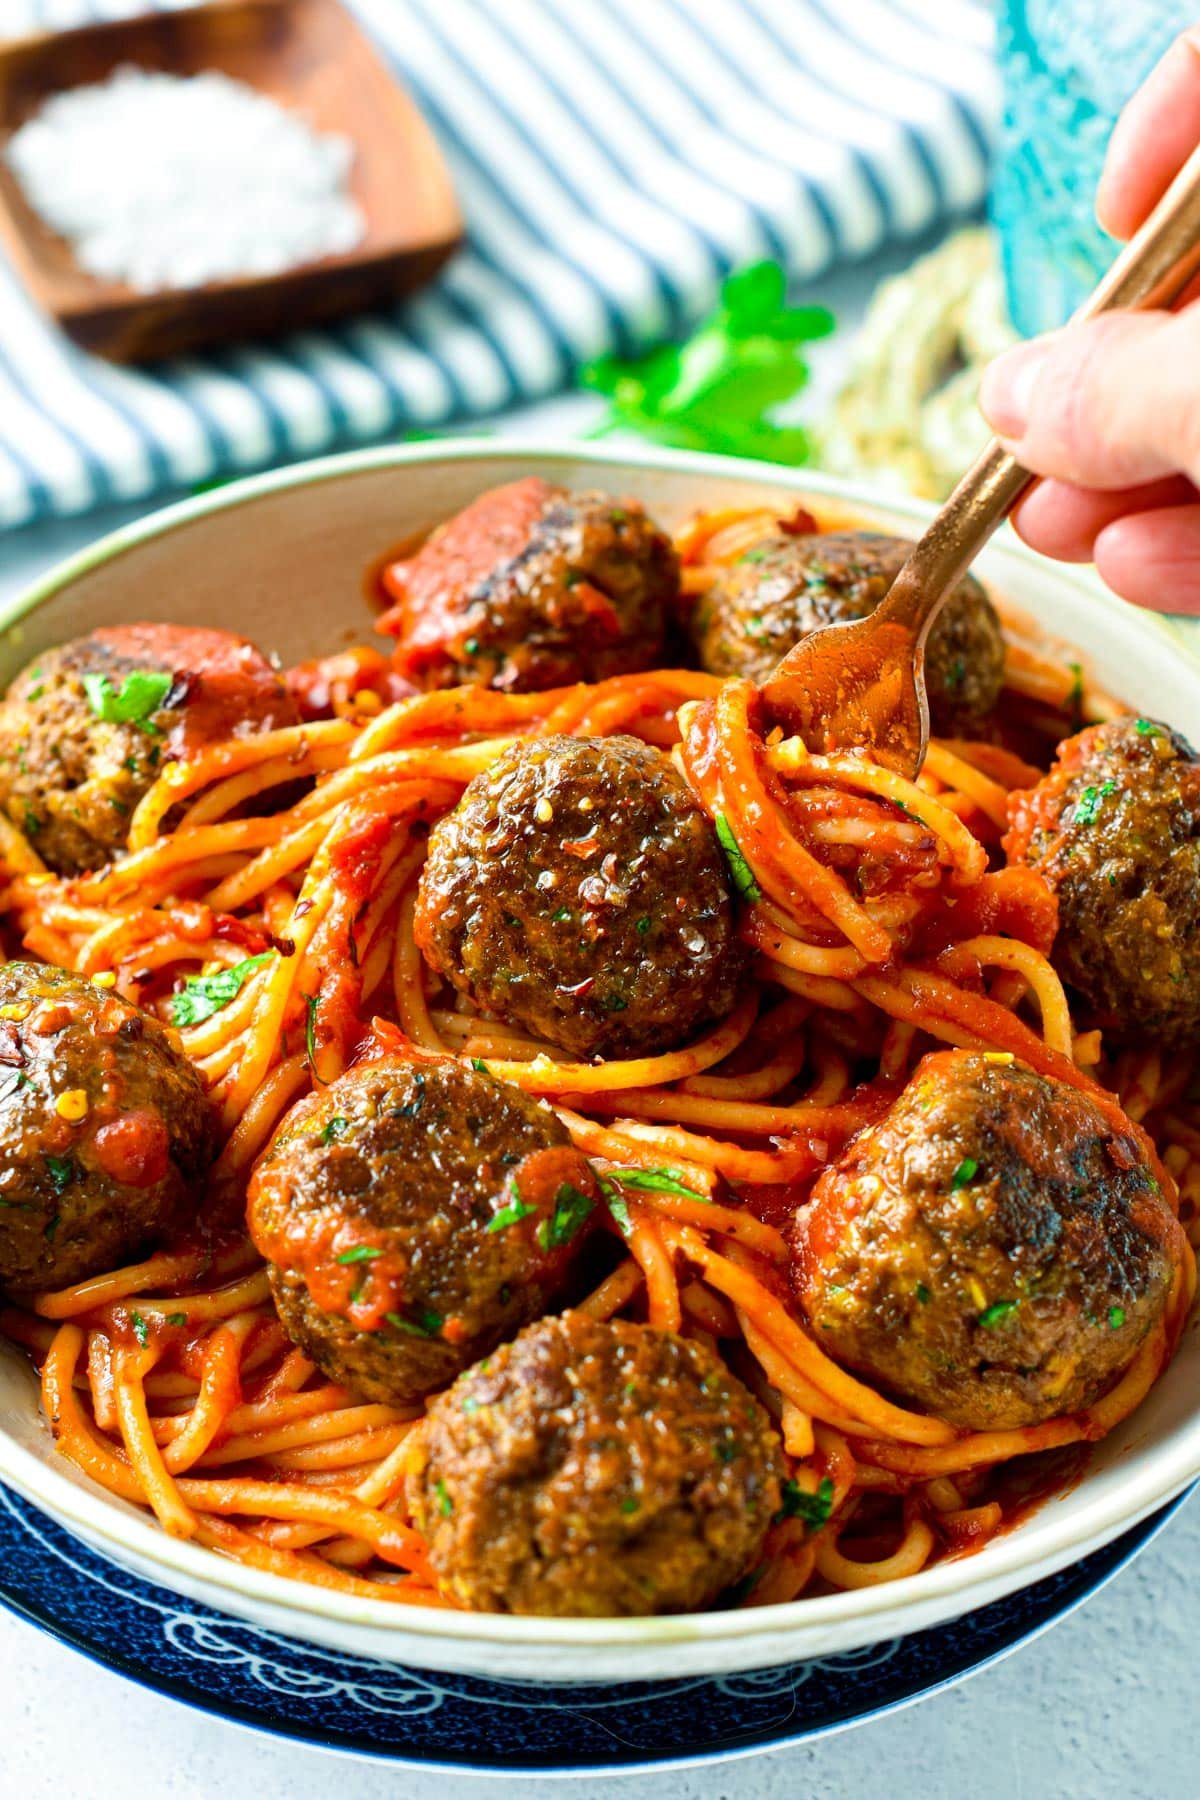 These TVP meatballs are chewy, juicy with a delicious meaty texture and flavor. Plus, they are packed with 16g plant-based proteins per serve and low fat too so perfect as a high-protein vegan meal.These TVP meatballs are chewy, juicy with a delicious meaty texture and flavor. Plus, they are packed with 16g plant-based proteins per serve and low fat too so perfect as a high-protein vegan meal.